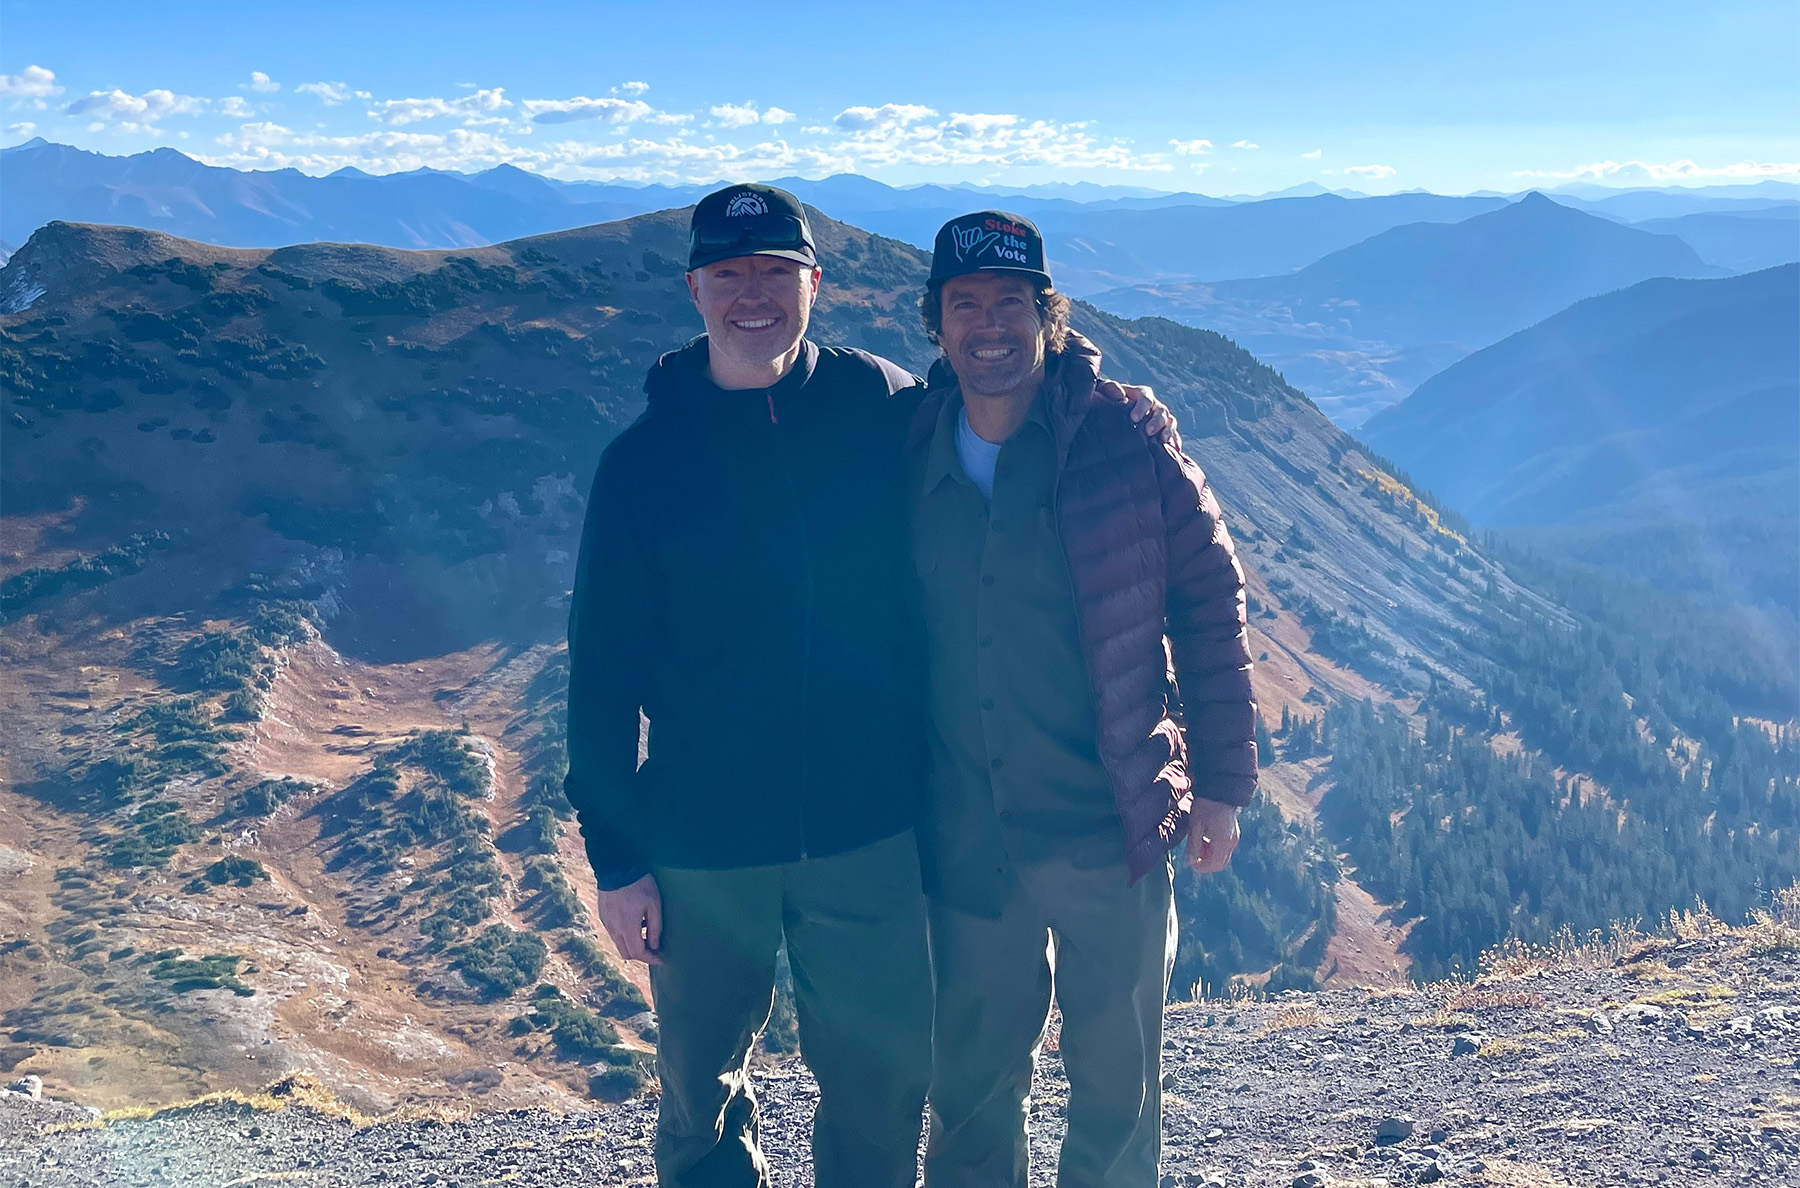 Blister Podcast: Jeremy Jones came to Western Colorado University for another installment of our Blister Speaker Series to discuss filming, snowboarding, founding POW, the ‘outdoor state,’ POW’s ongoing and evolving efforts to address climate change, and more.